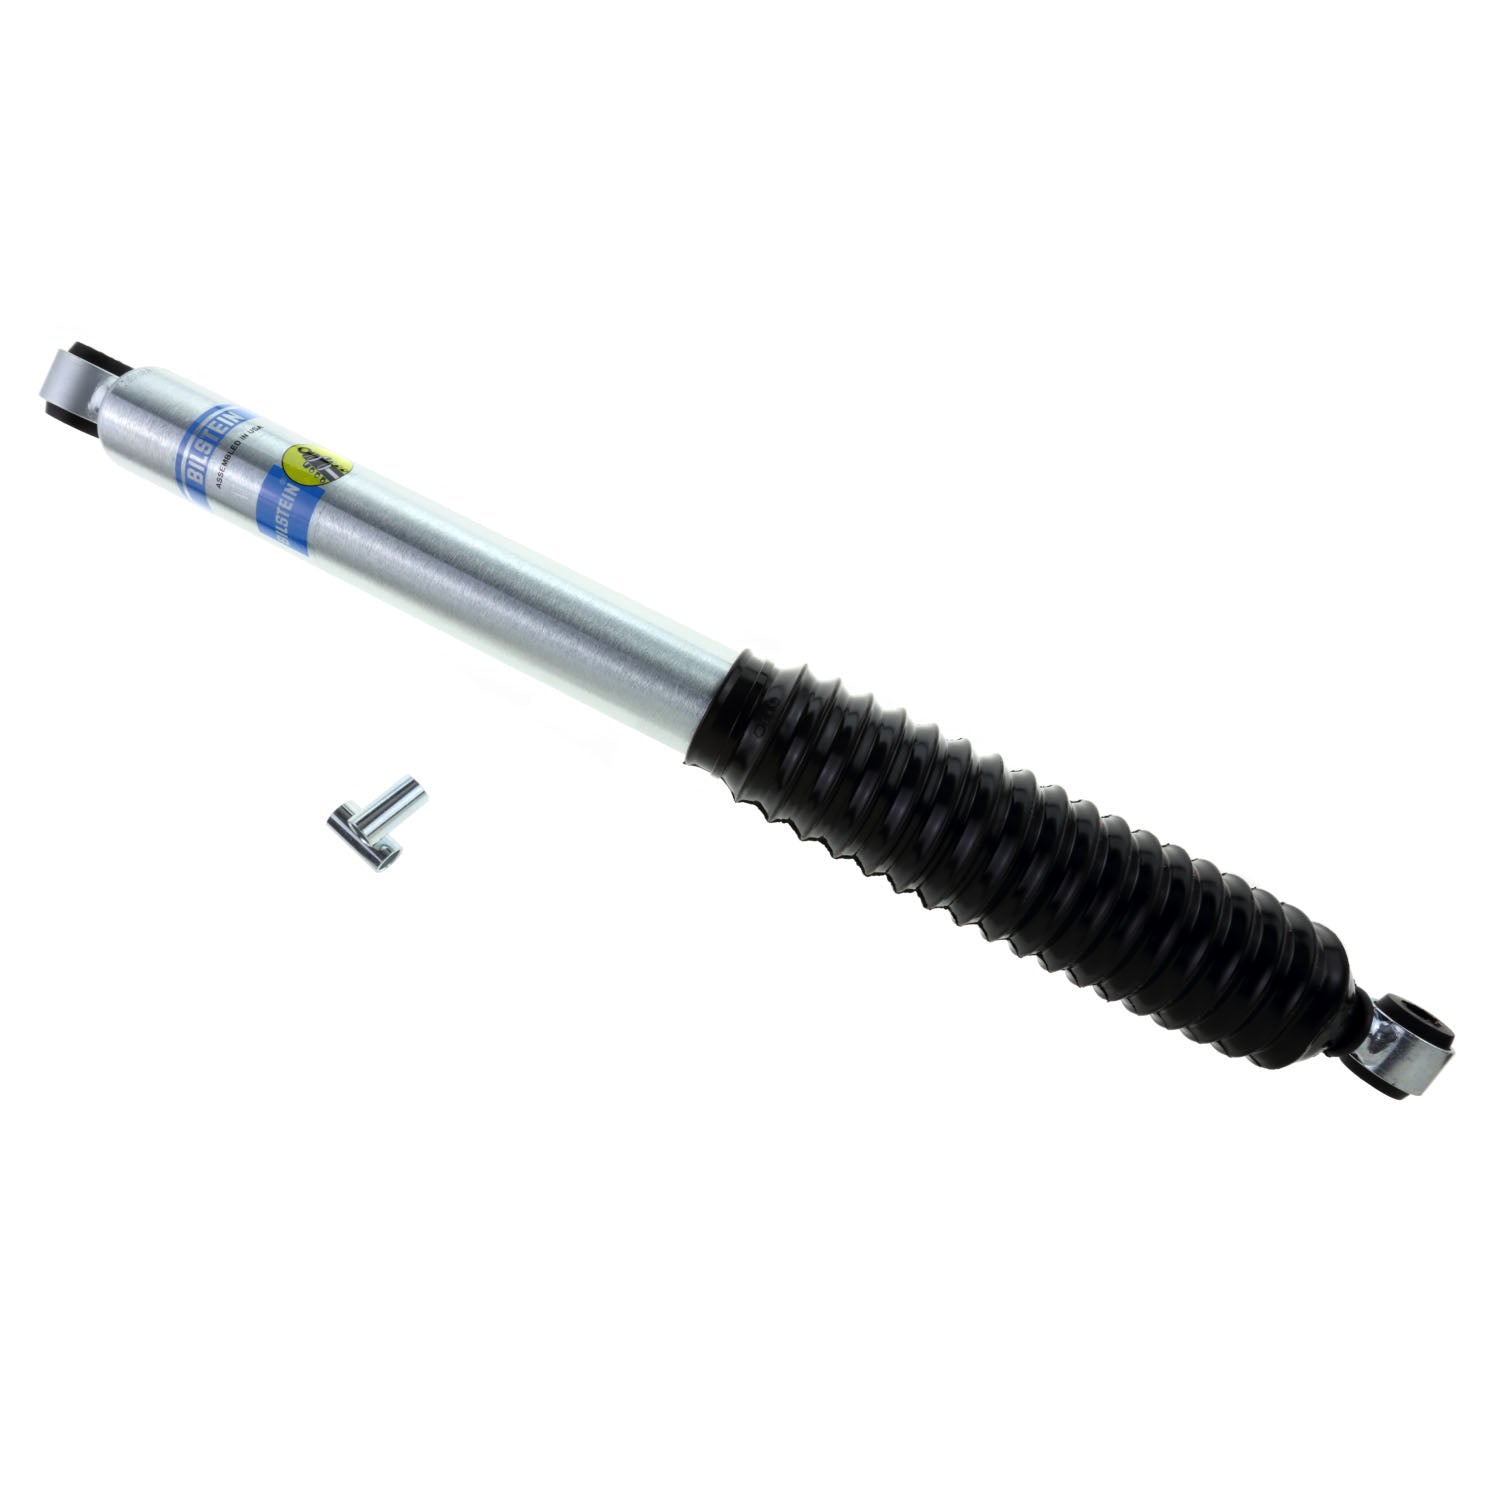 Bilstein 5100 Series For Ford Excursion, Ford F-250 Super Duty, Ford F-350 Super Duty